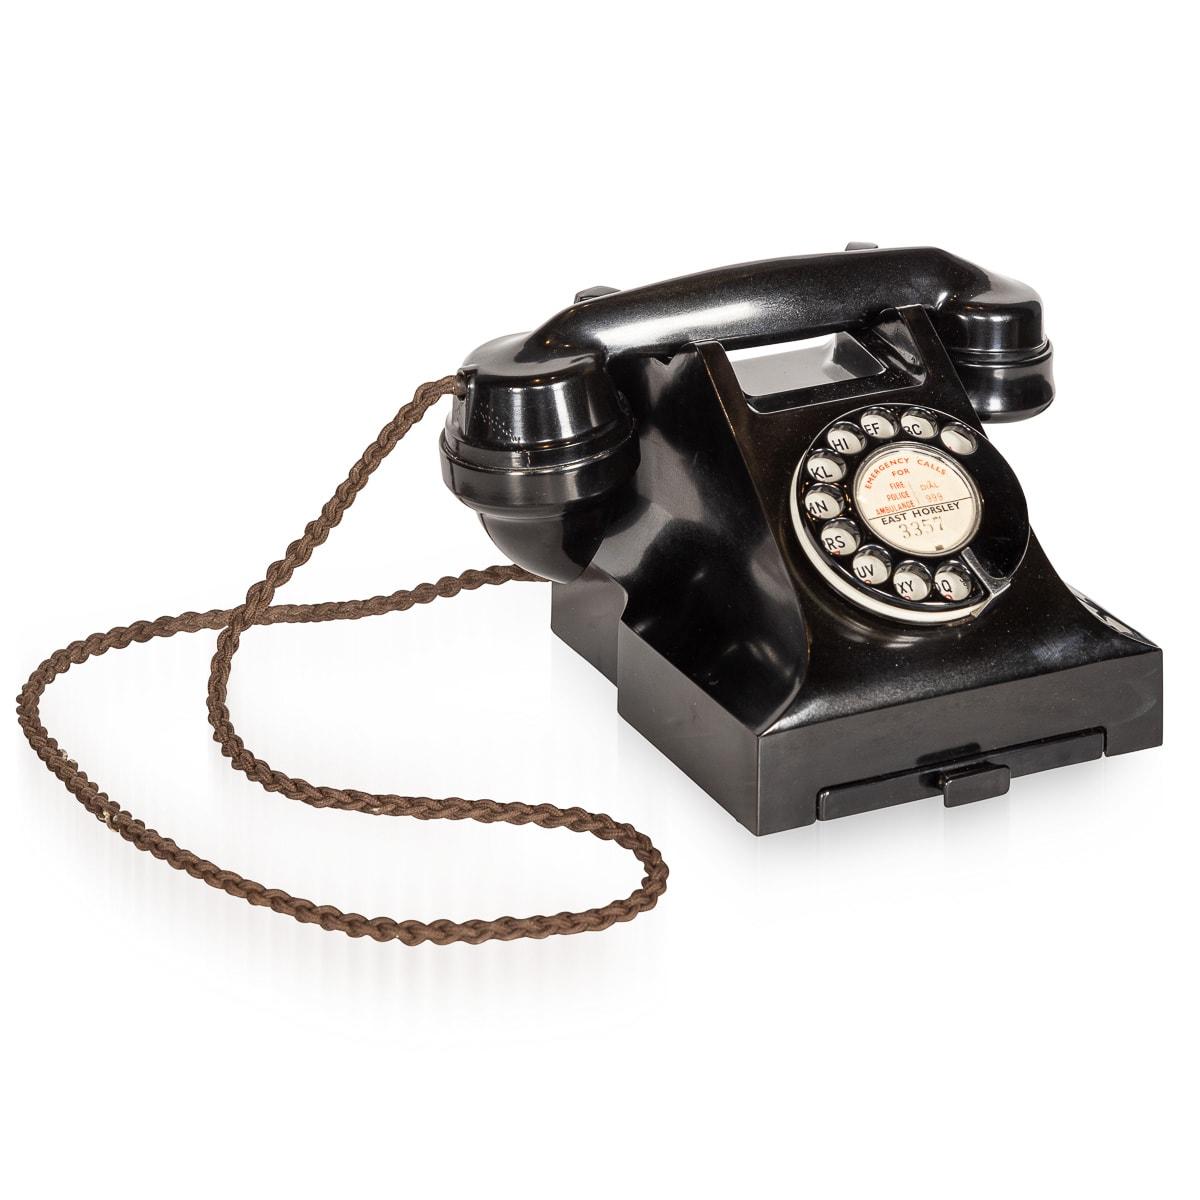 A superb and rare early 20th Century rotary Bakelite telephone. The phone features the original cord connecting handset to reciever and a small drawer at the front revealing a pad for telephone numbers. This device has been fully adapted to work